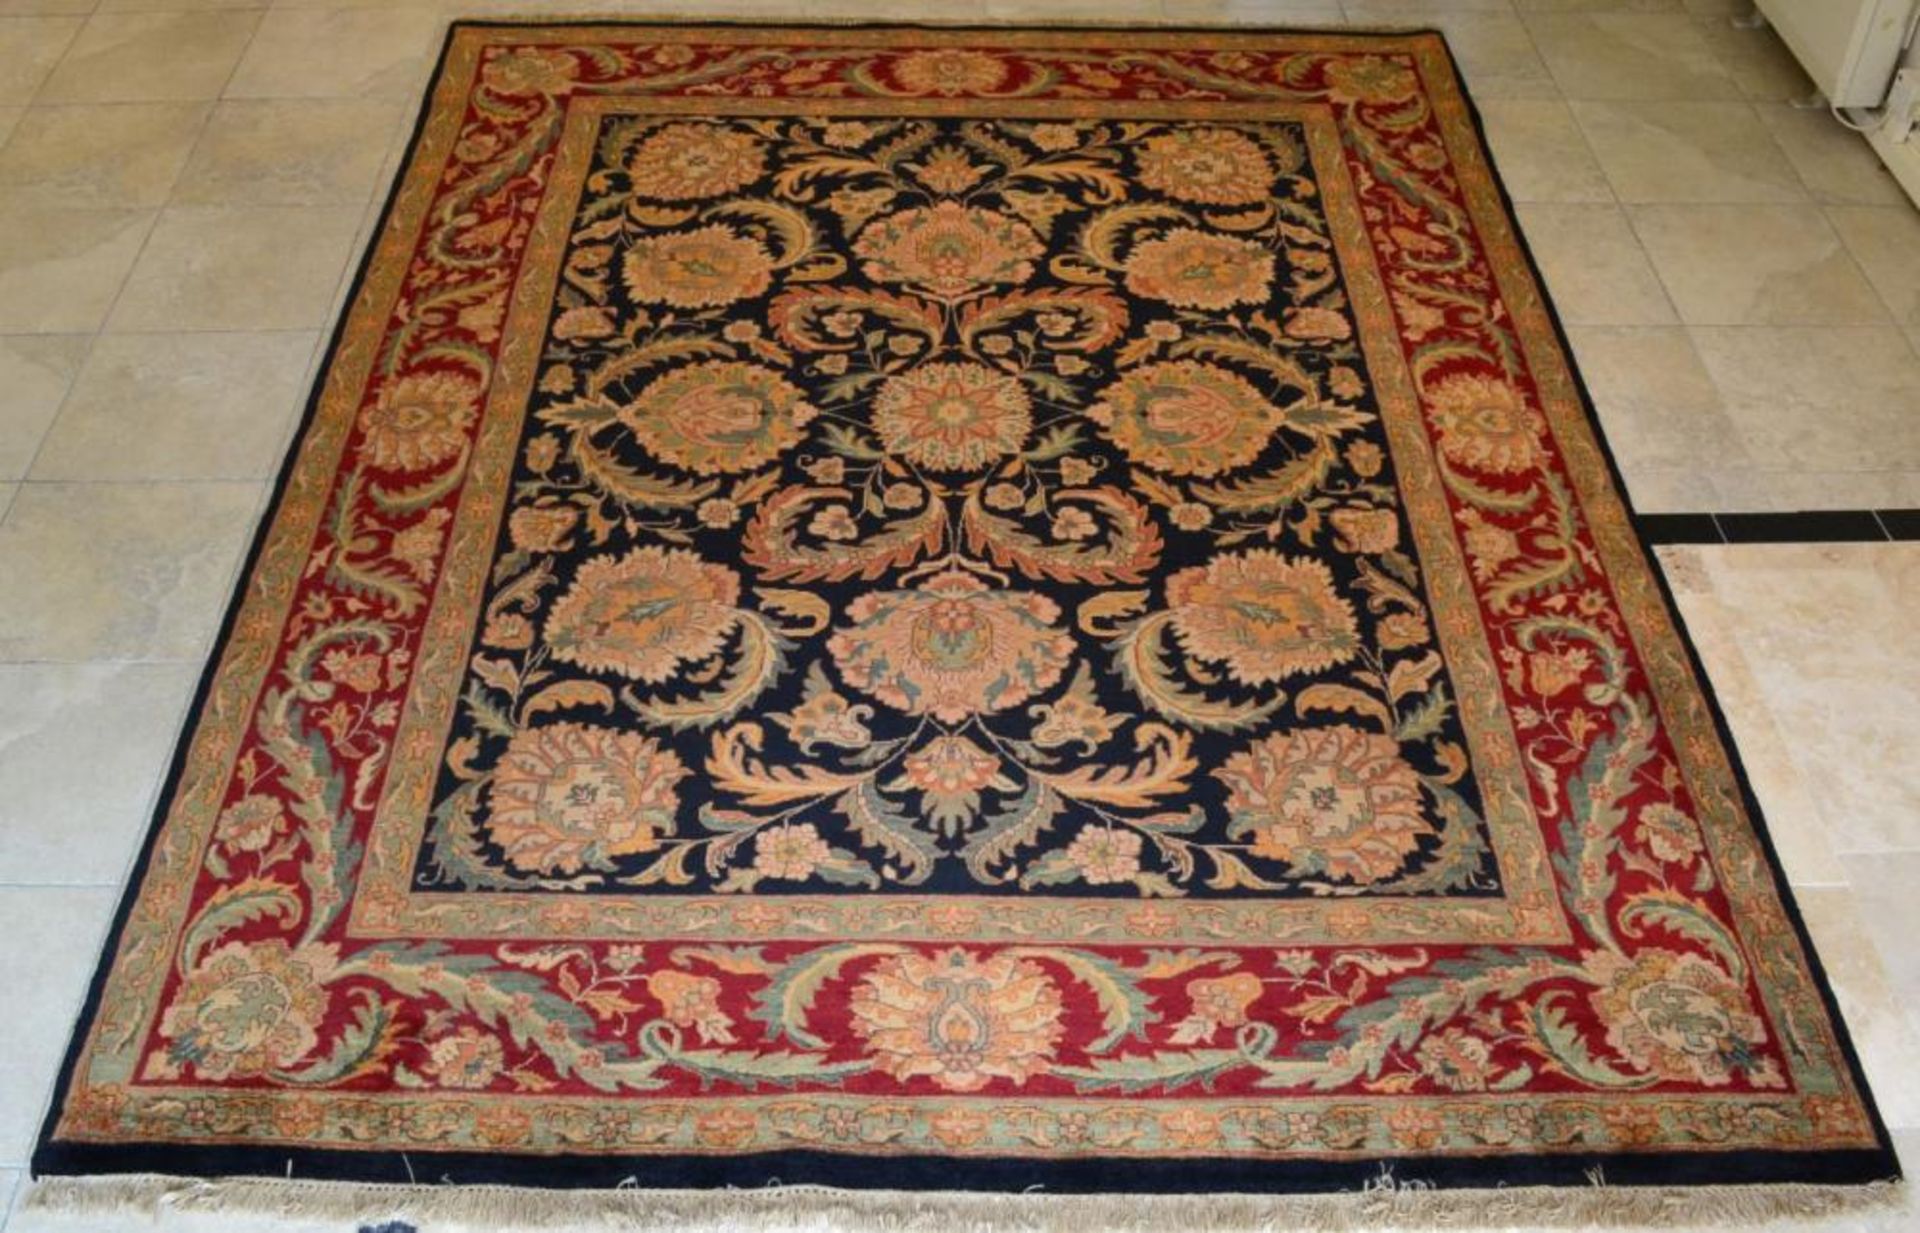 1 x Red and Black Jaipur Handknotted Carpet - Handwoven In Jaipur With Handspun Wool And Vegetable - Image 5 of 16